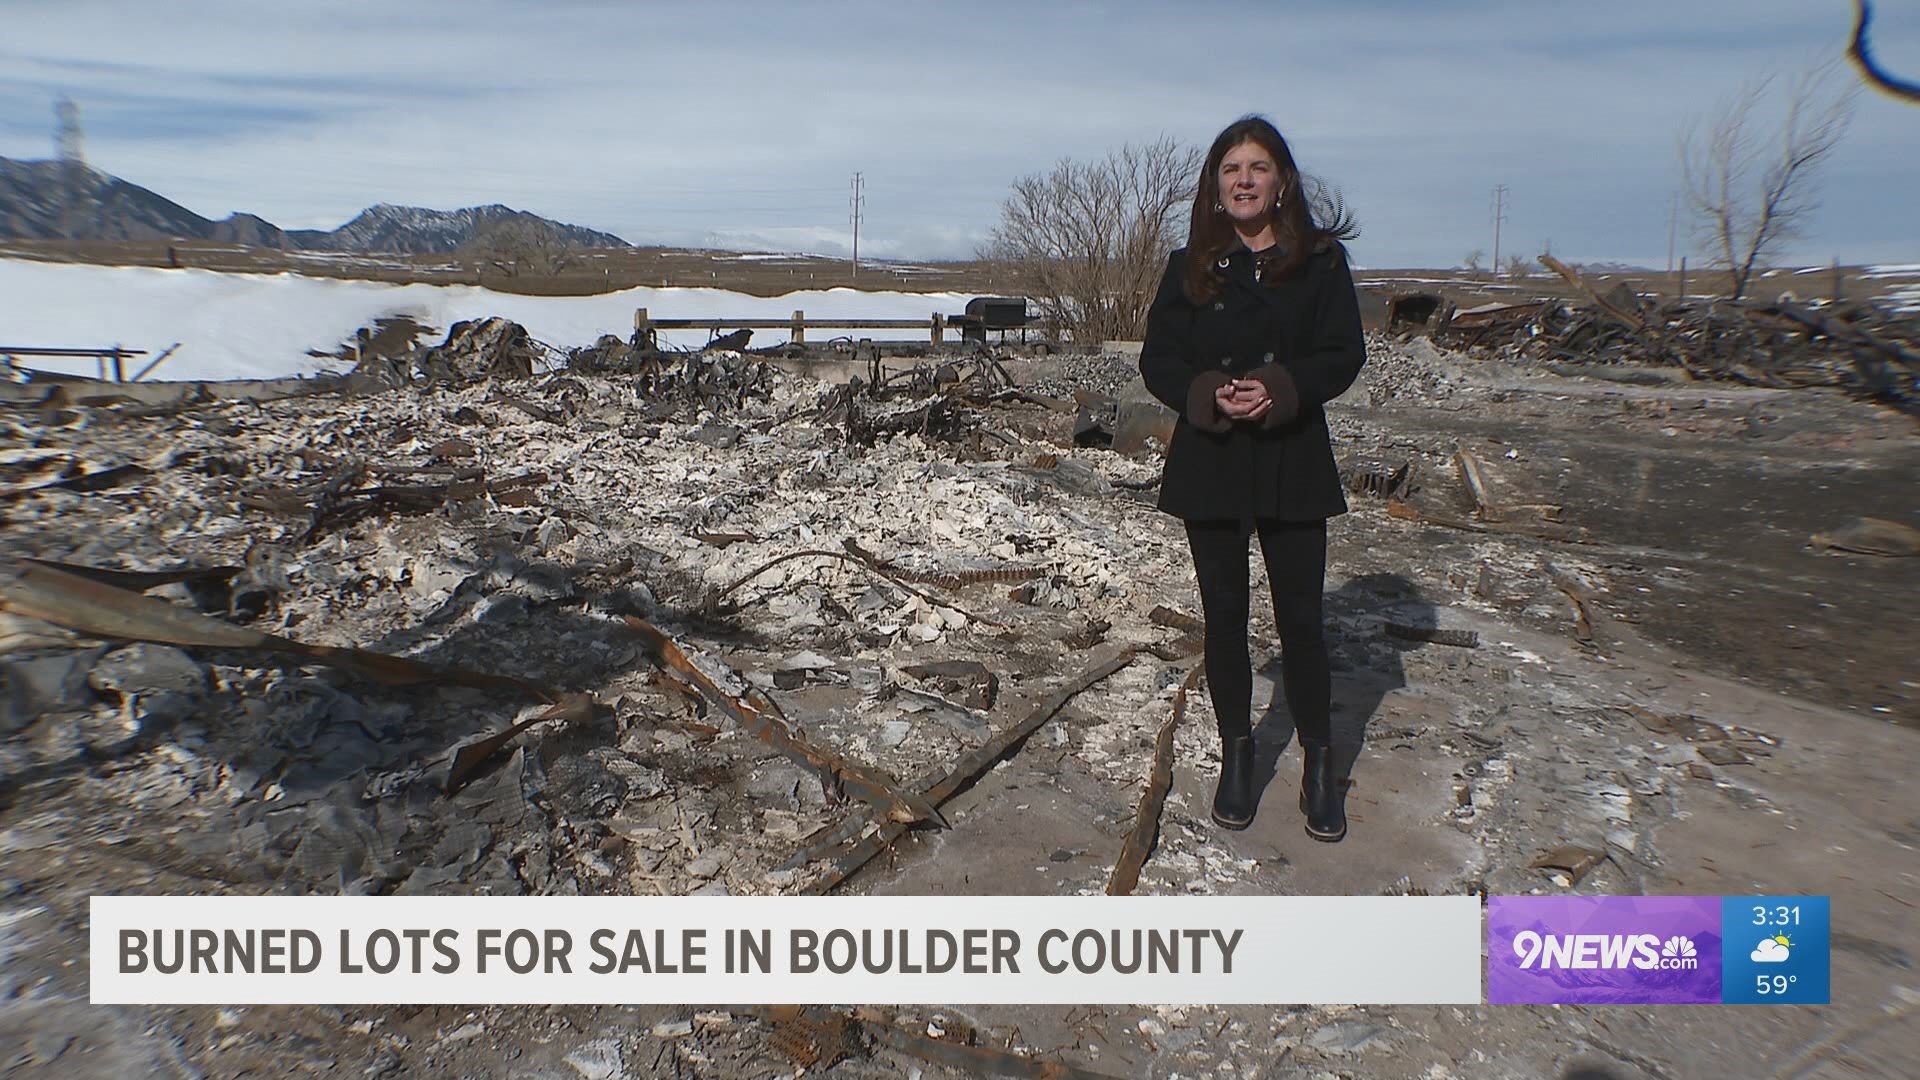 Jenner Eiss, a real estate agent, said there's a lot of interest, but buyers are concerned about the debris cleanup timeline, and who pays for it.